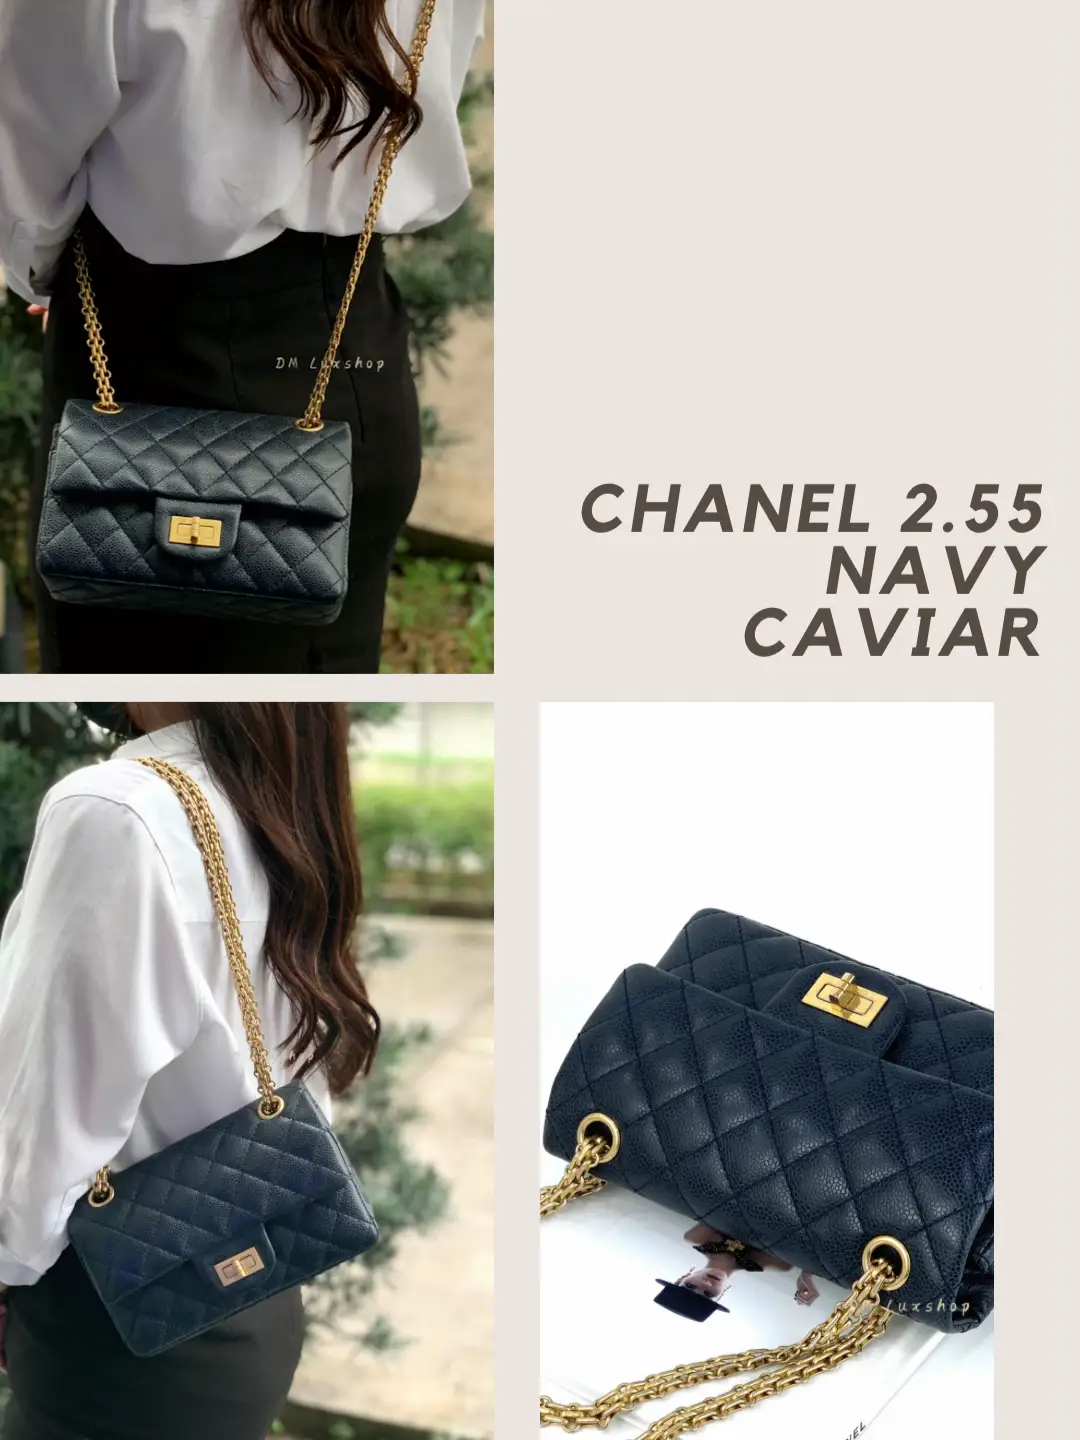 🇲🇾Chanel 2.55 Mini Caviar, Gallery posted by DM Luxshop